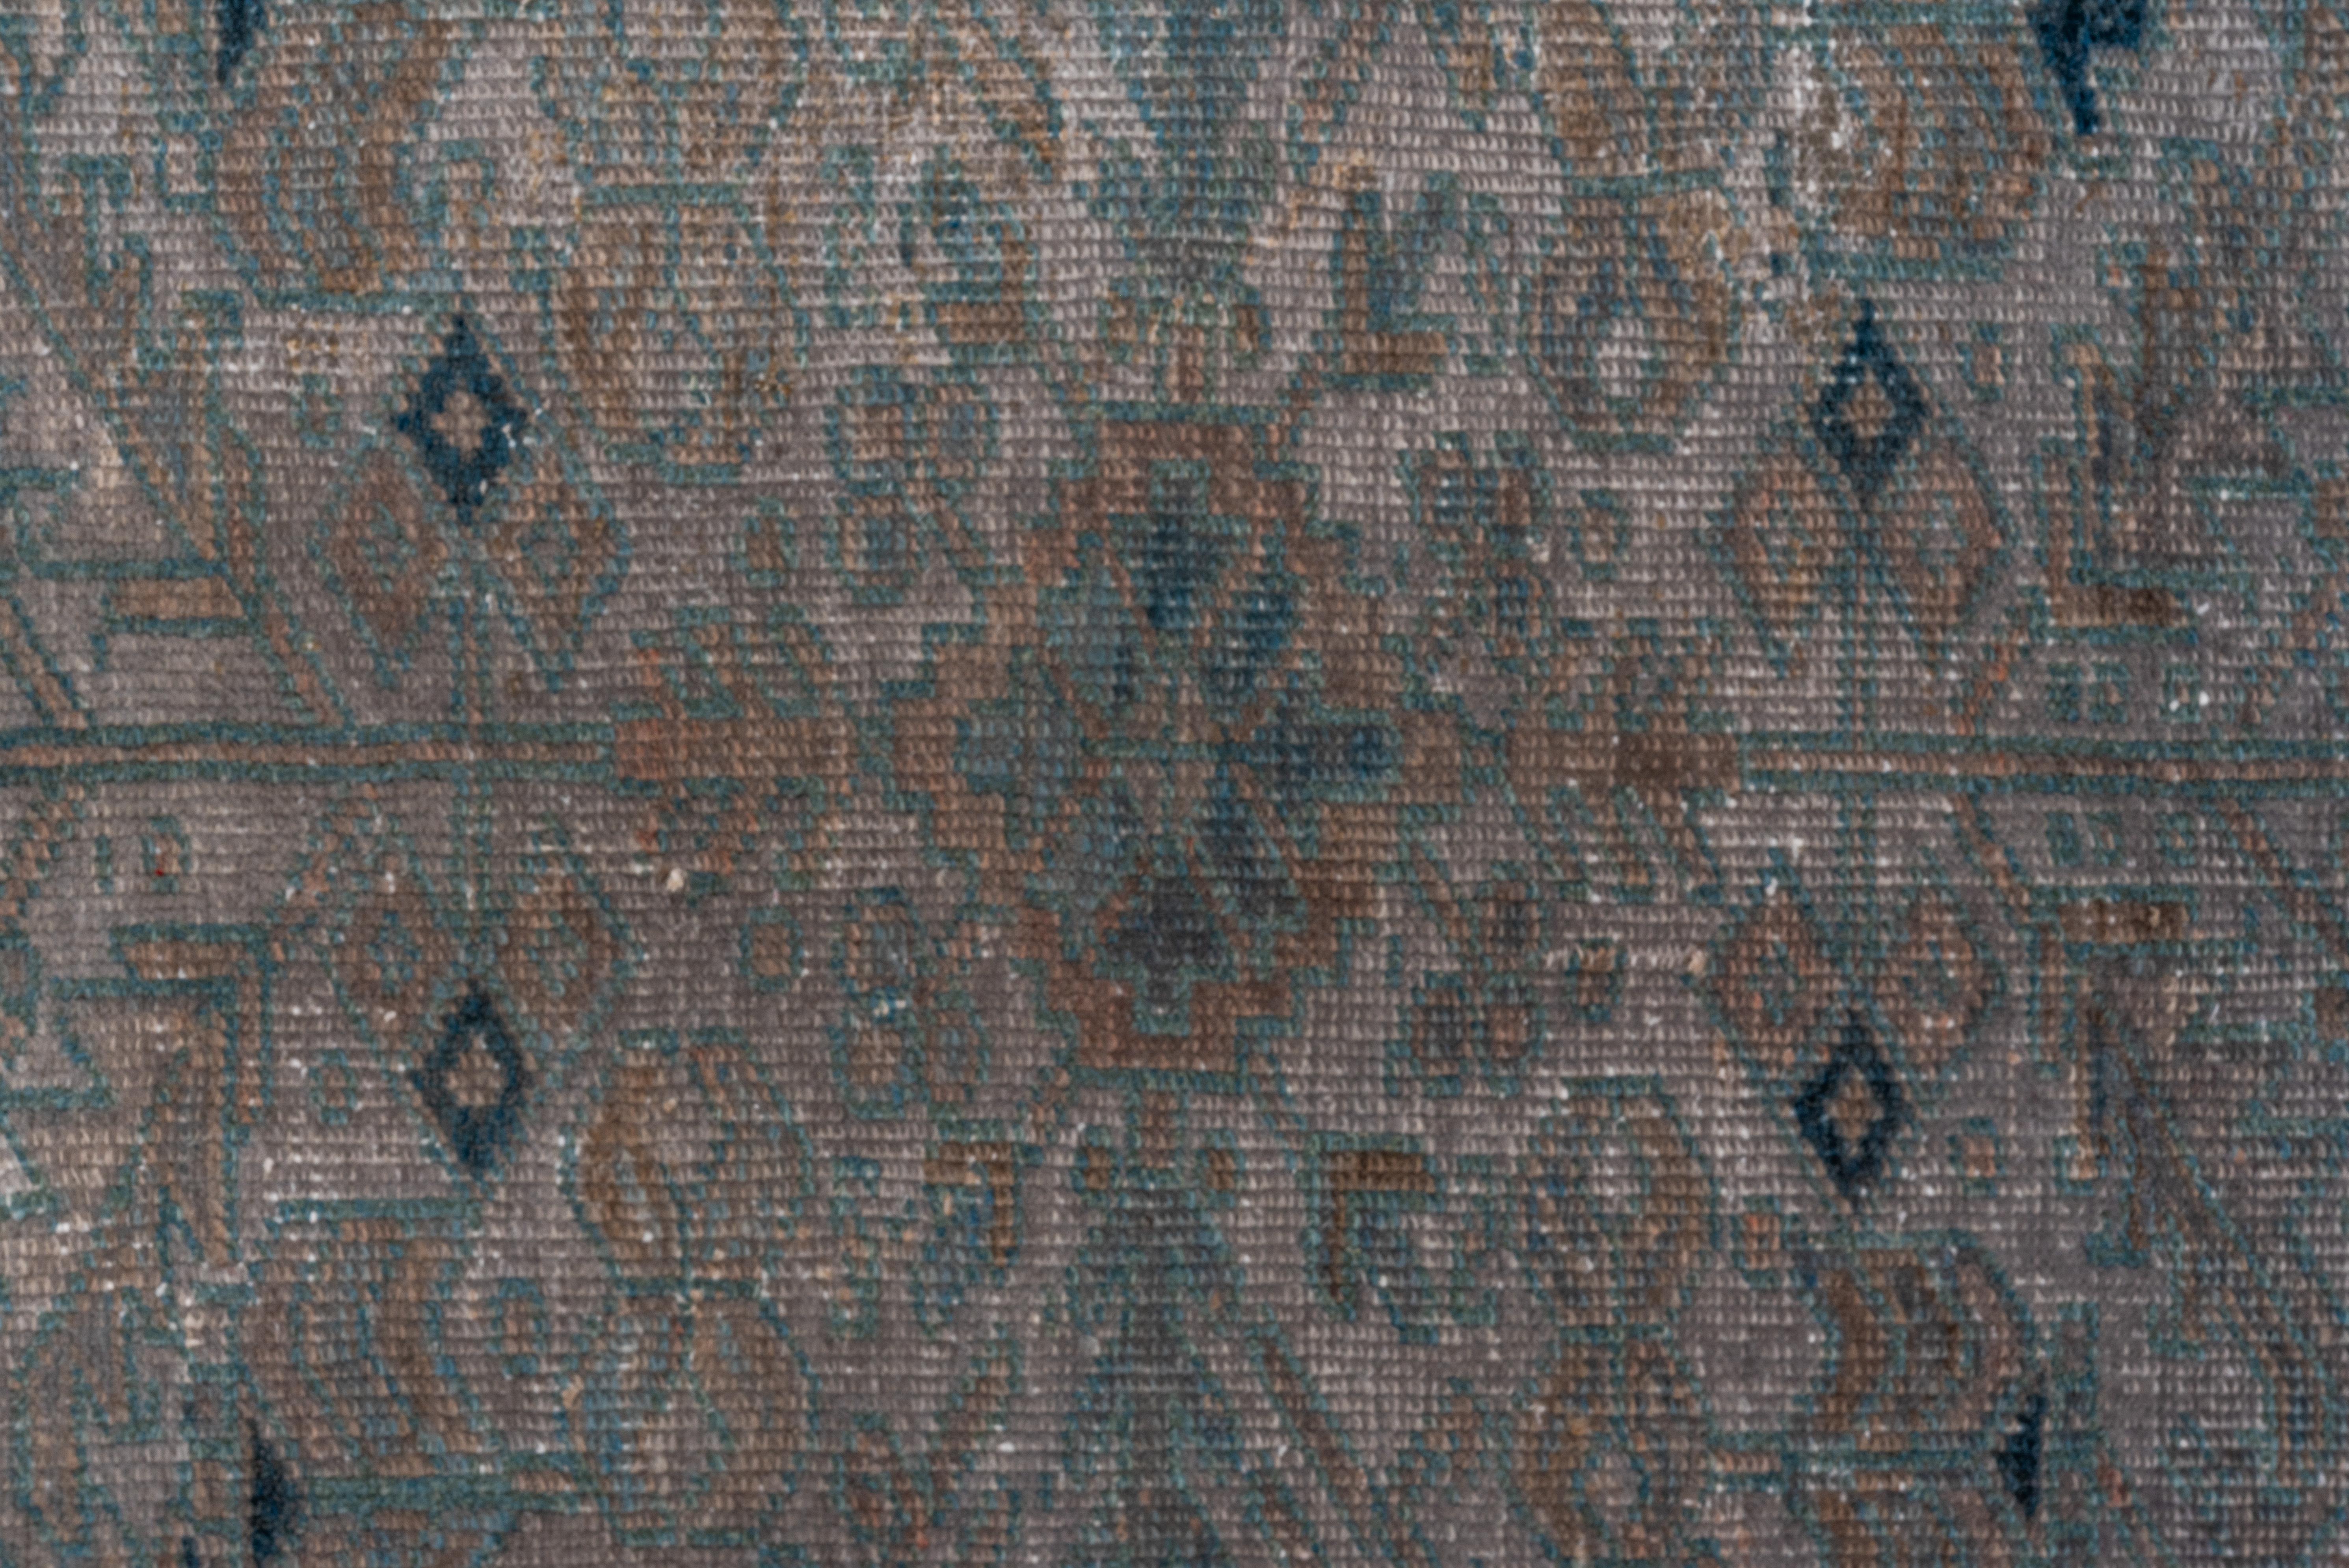 Mid-20th Century Antique Gray Persian Heriz Rug, Blue and Teal Accents, All-Over Field